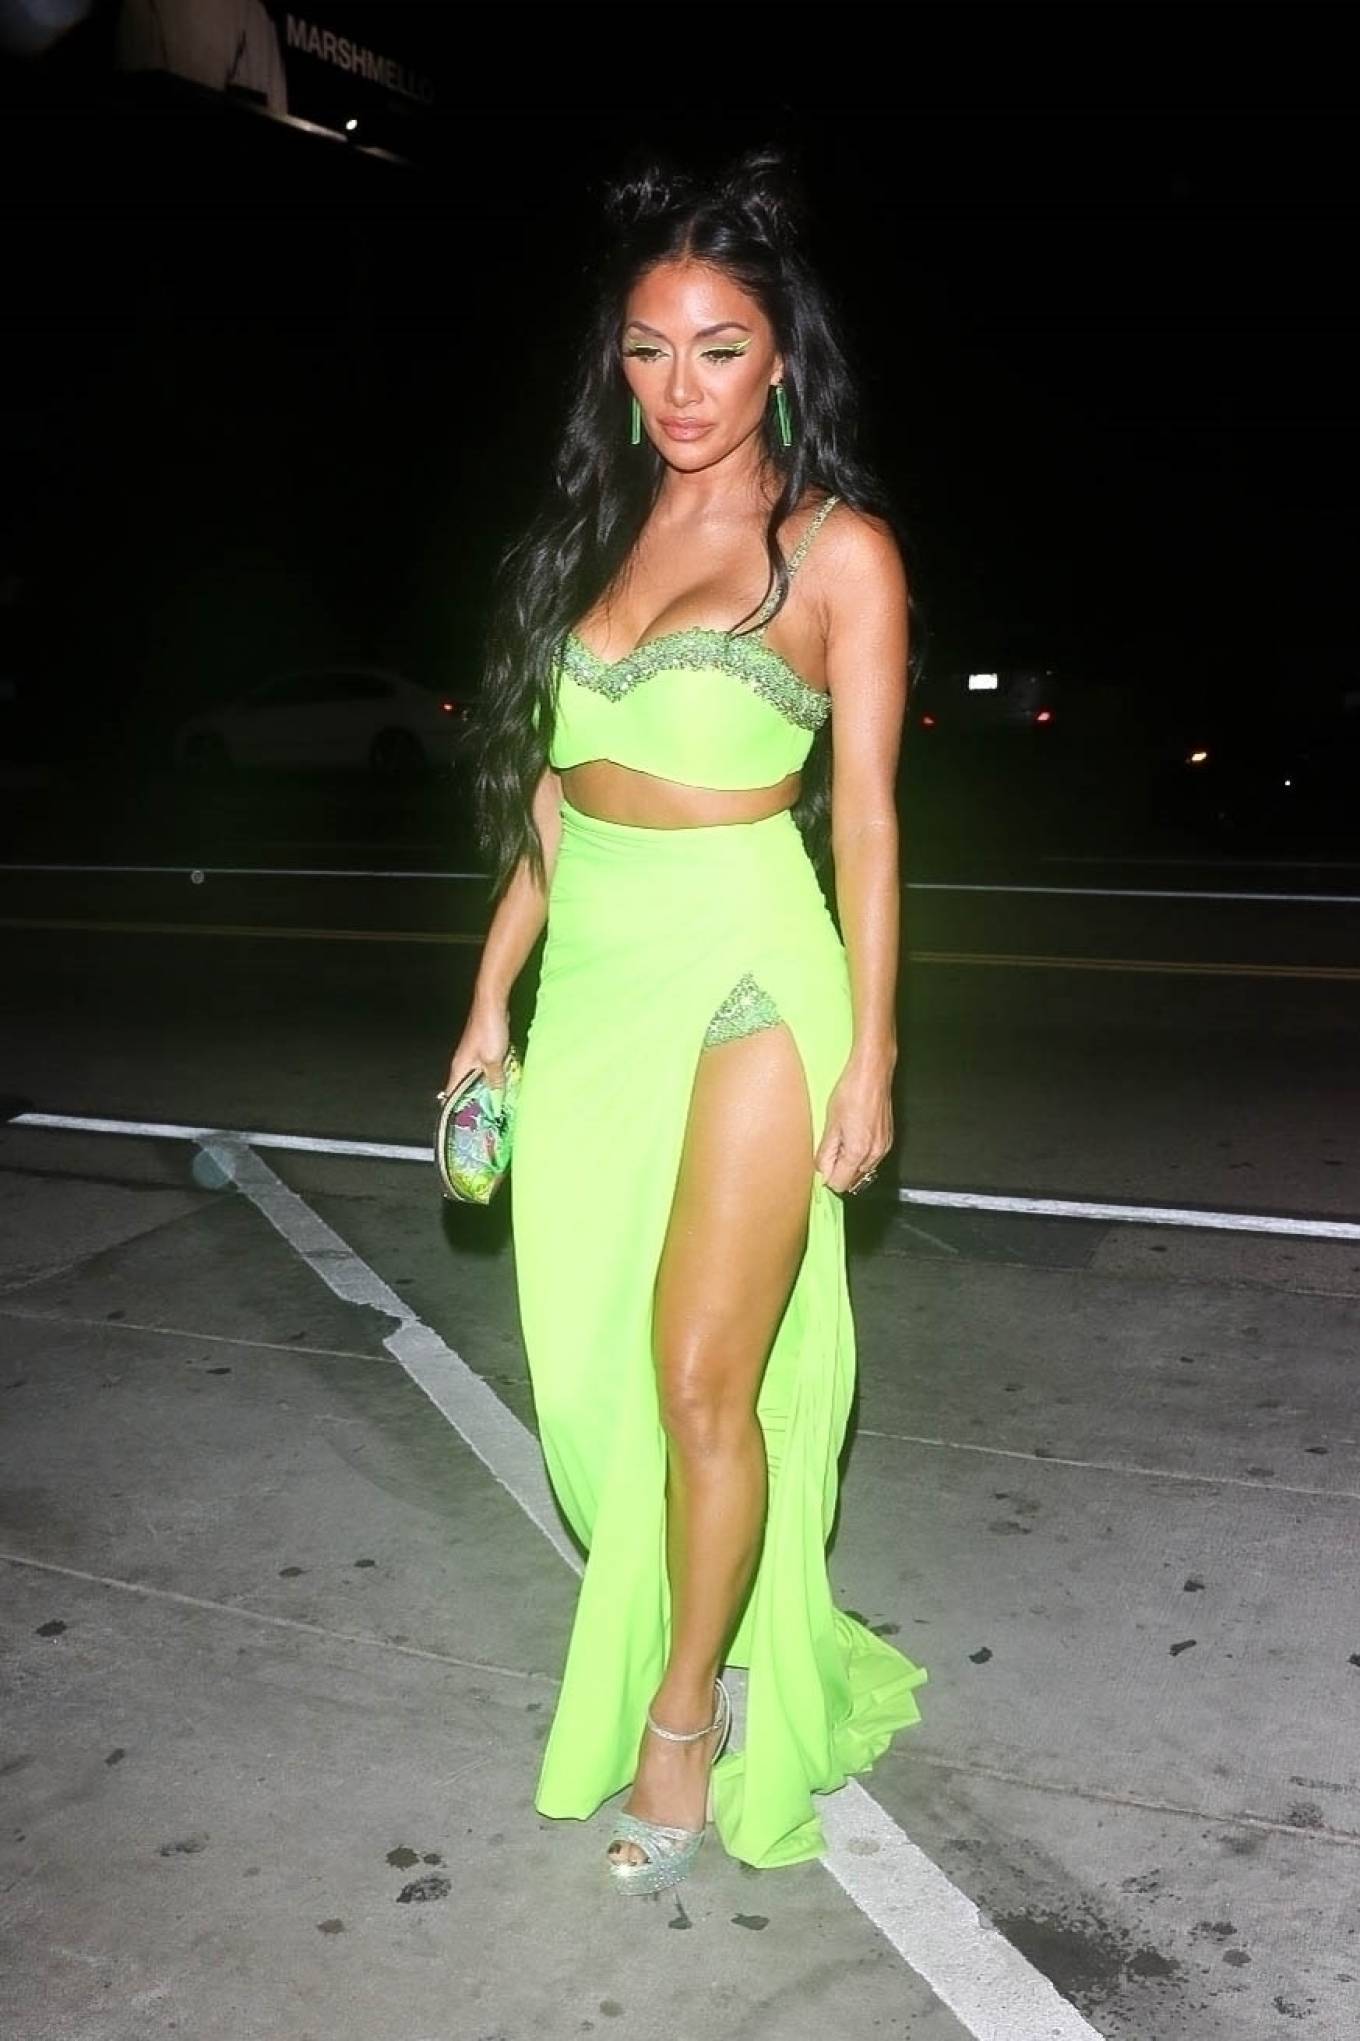 Nicole Scherzinger 2021 : Nicole Scherzinger – Night out in a neon green dress at Catch LA in West Hollywood-24